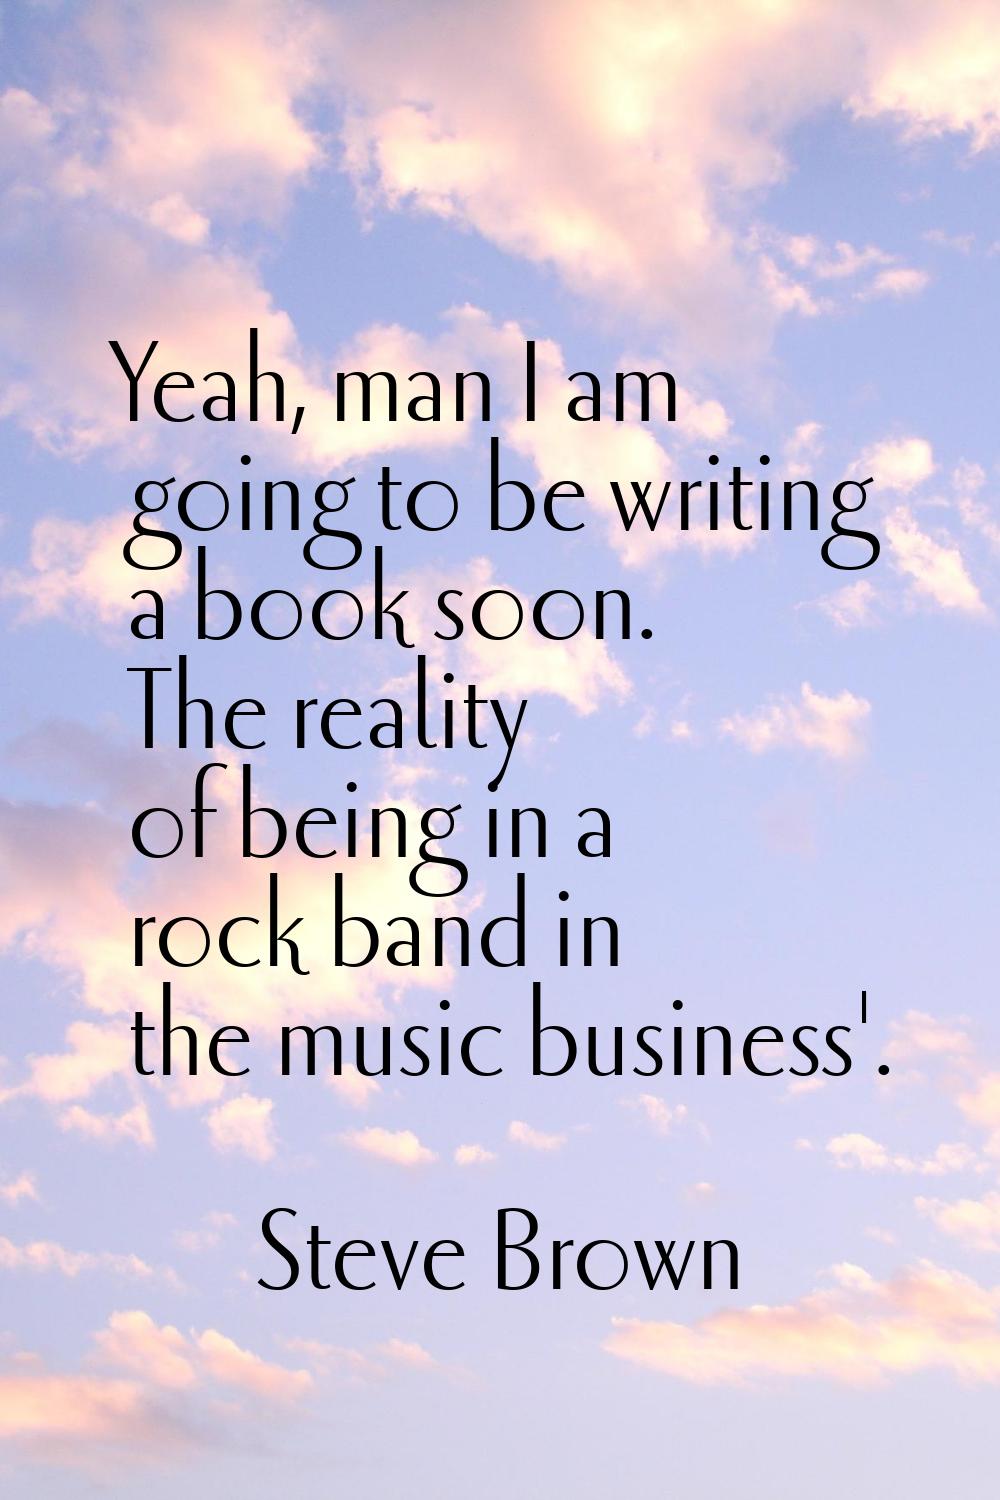 Yeah, man I am going to be writing a book soon. The reality of being in a rock band in the music bu